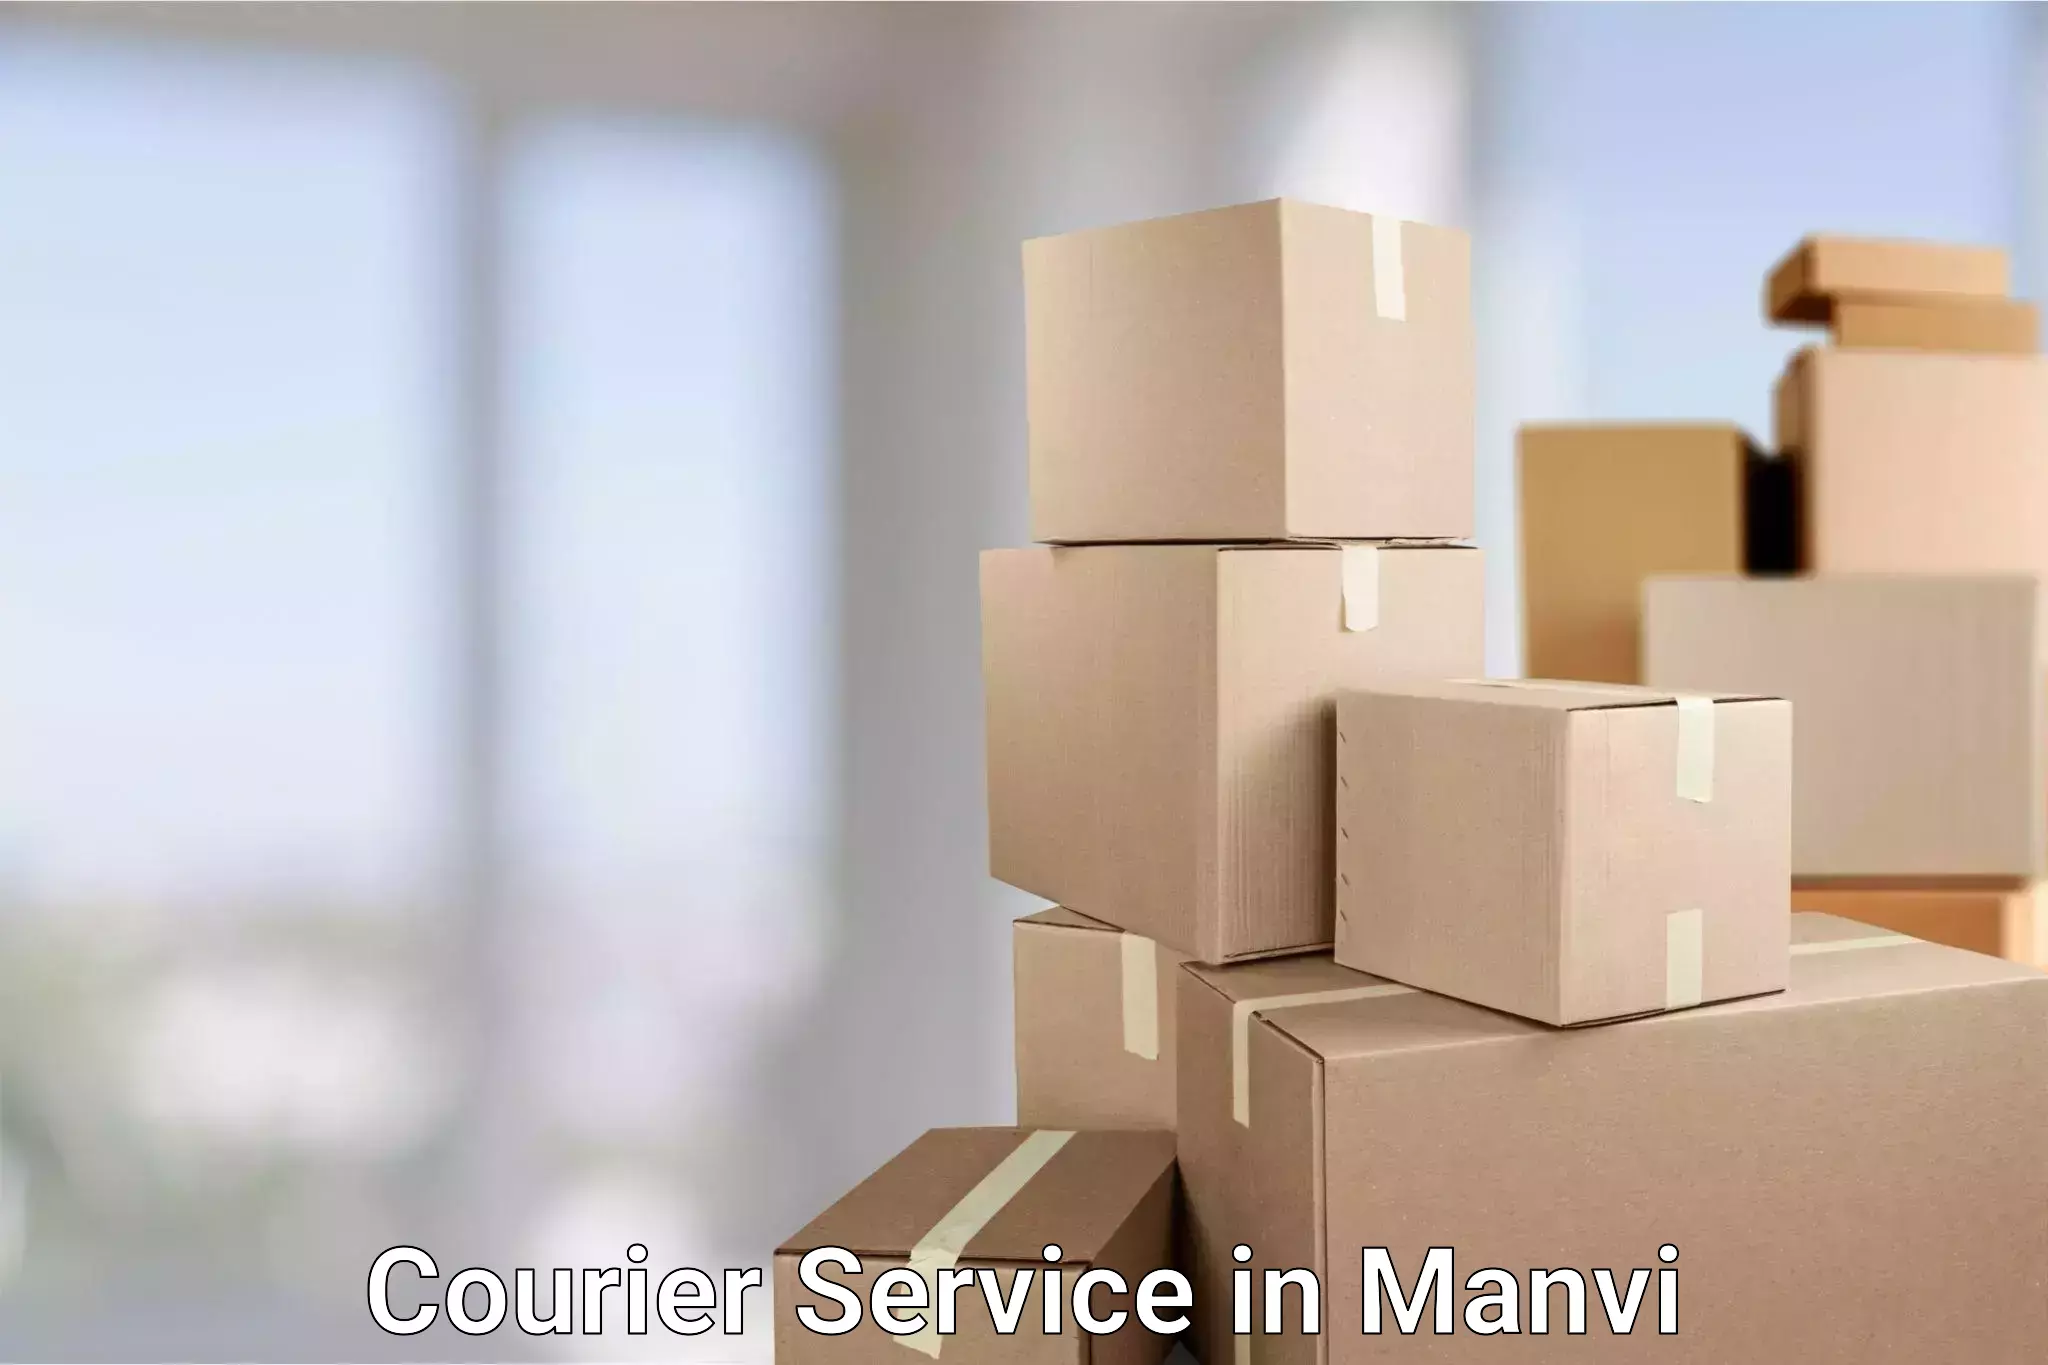 Advanced shipping technology in Manvi